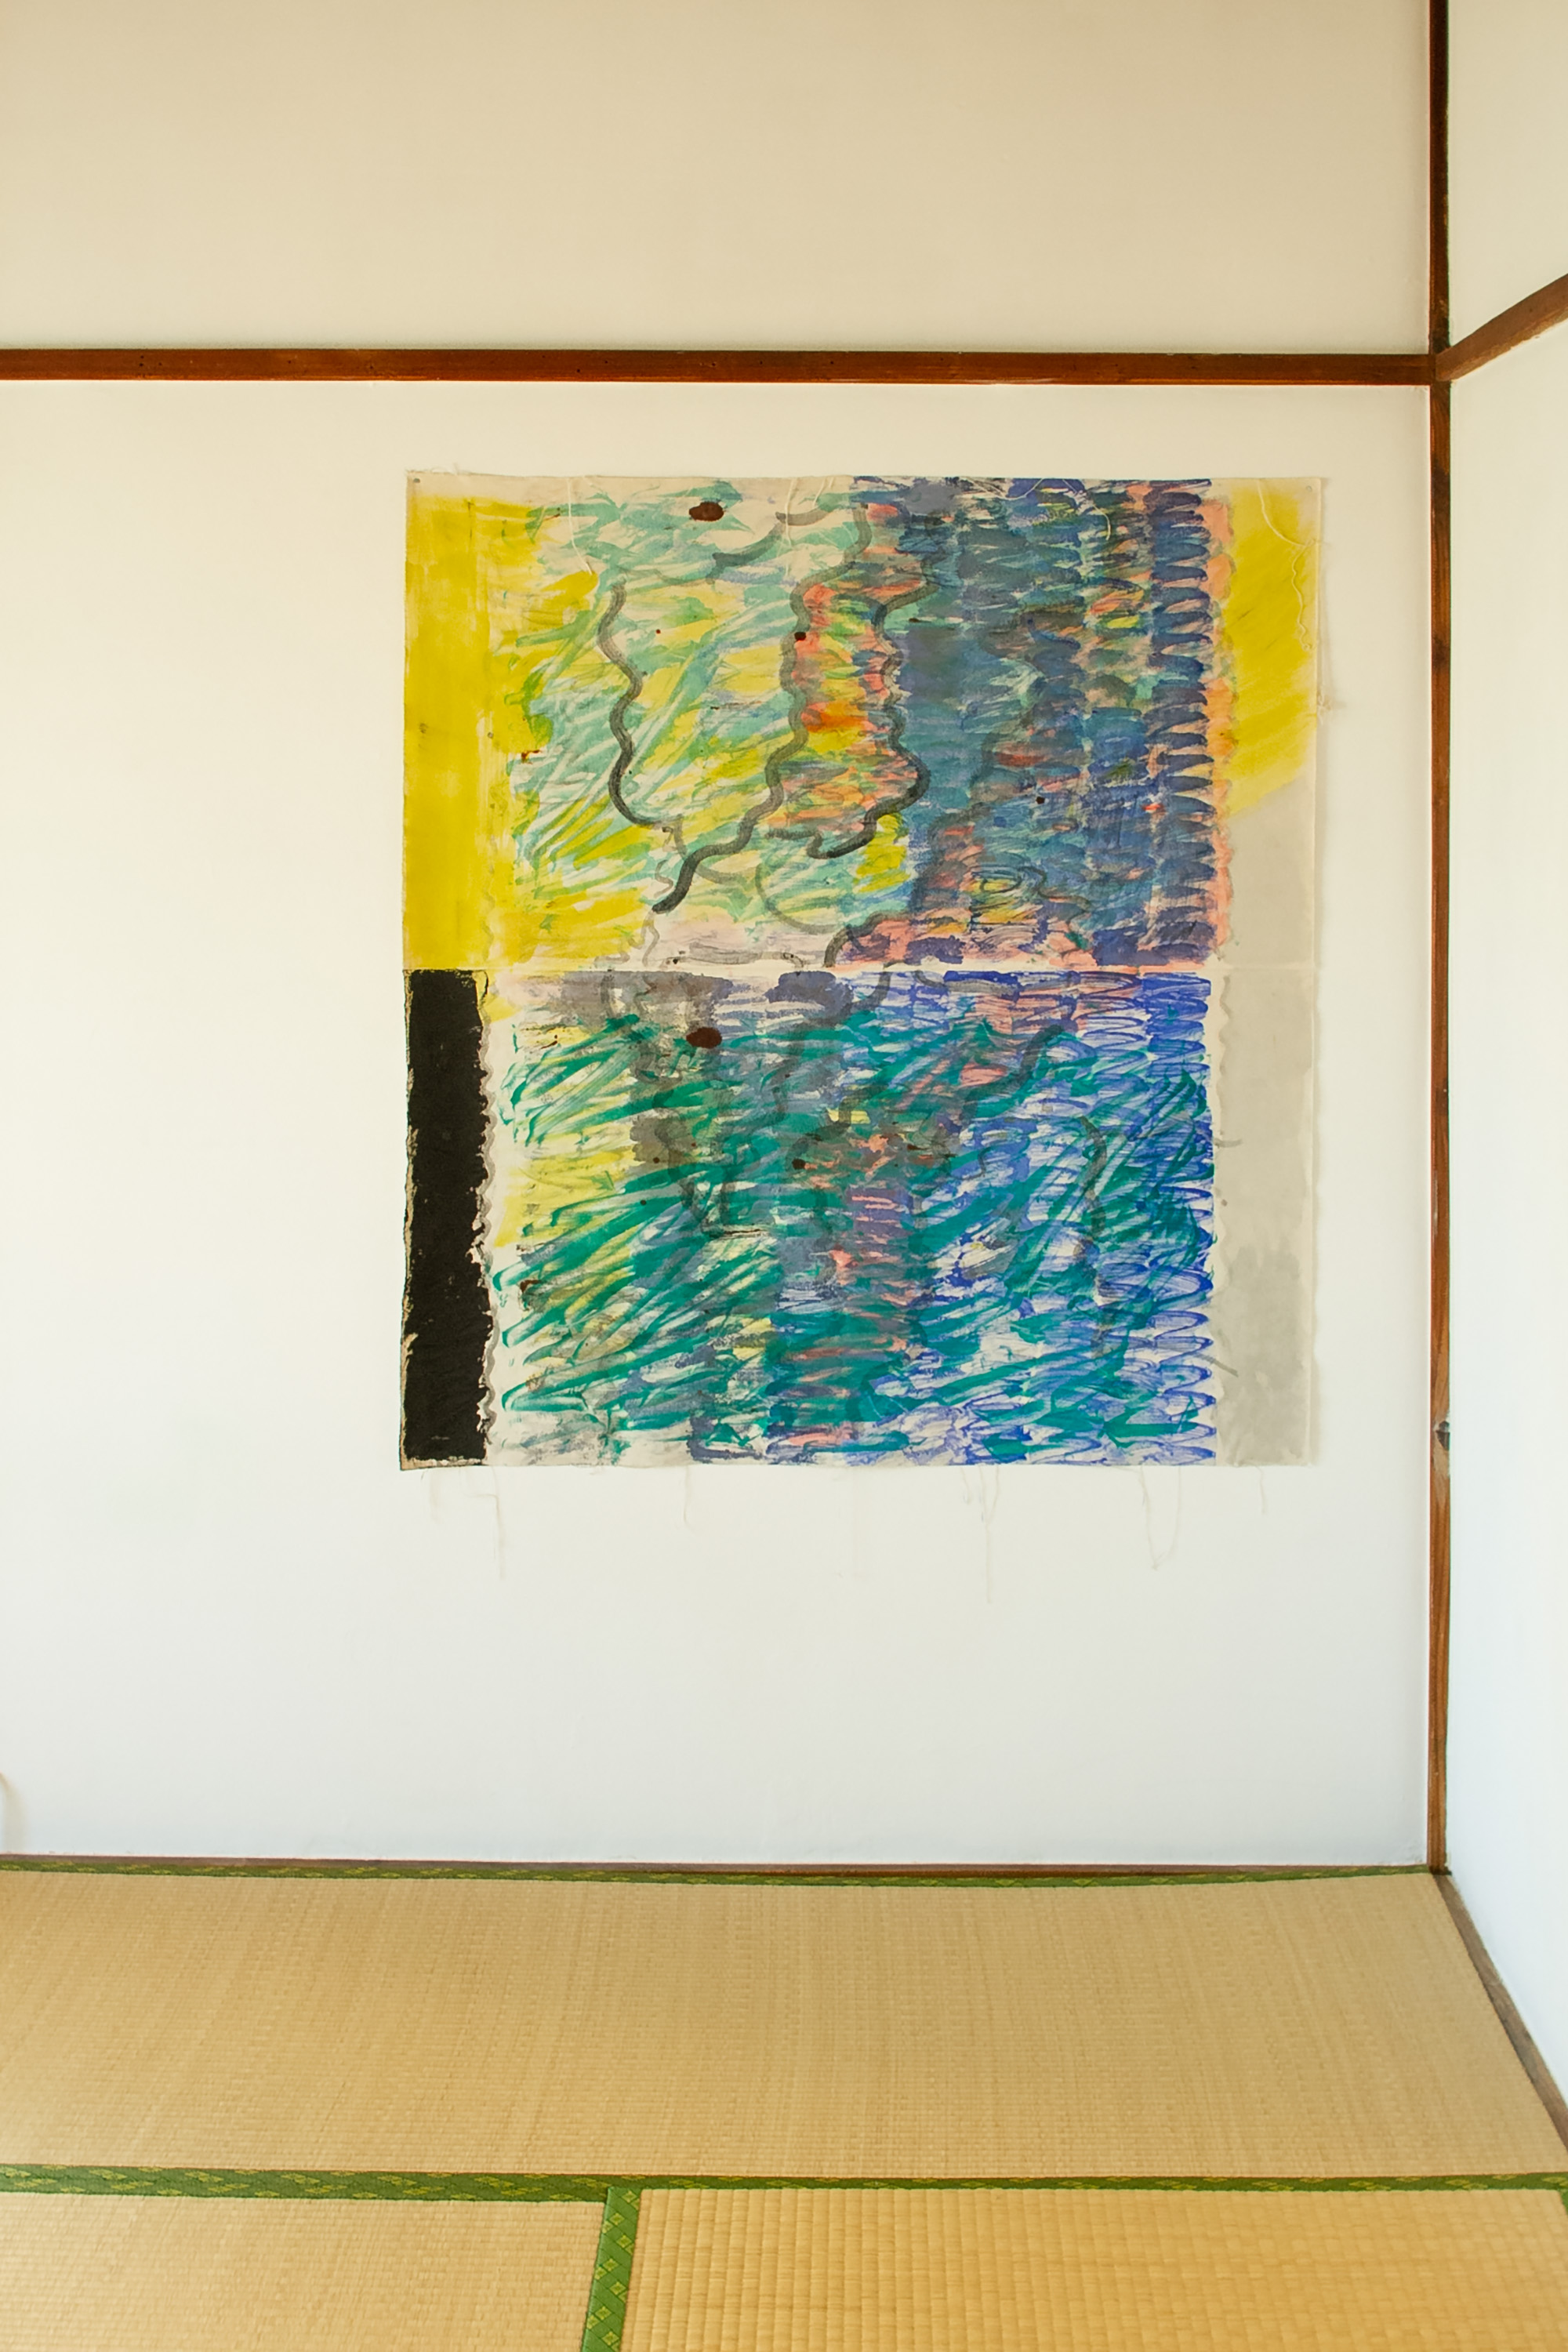 Bathing (lamplight or urine), 2020, oil on un-stretched canvas, 1000 x 1200mm (Installation View)